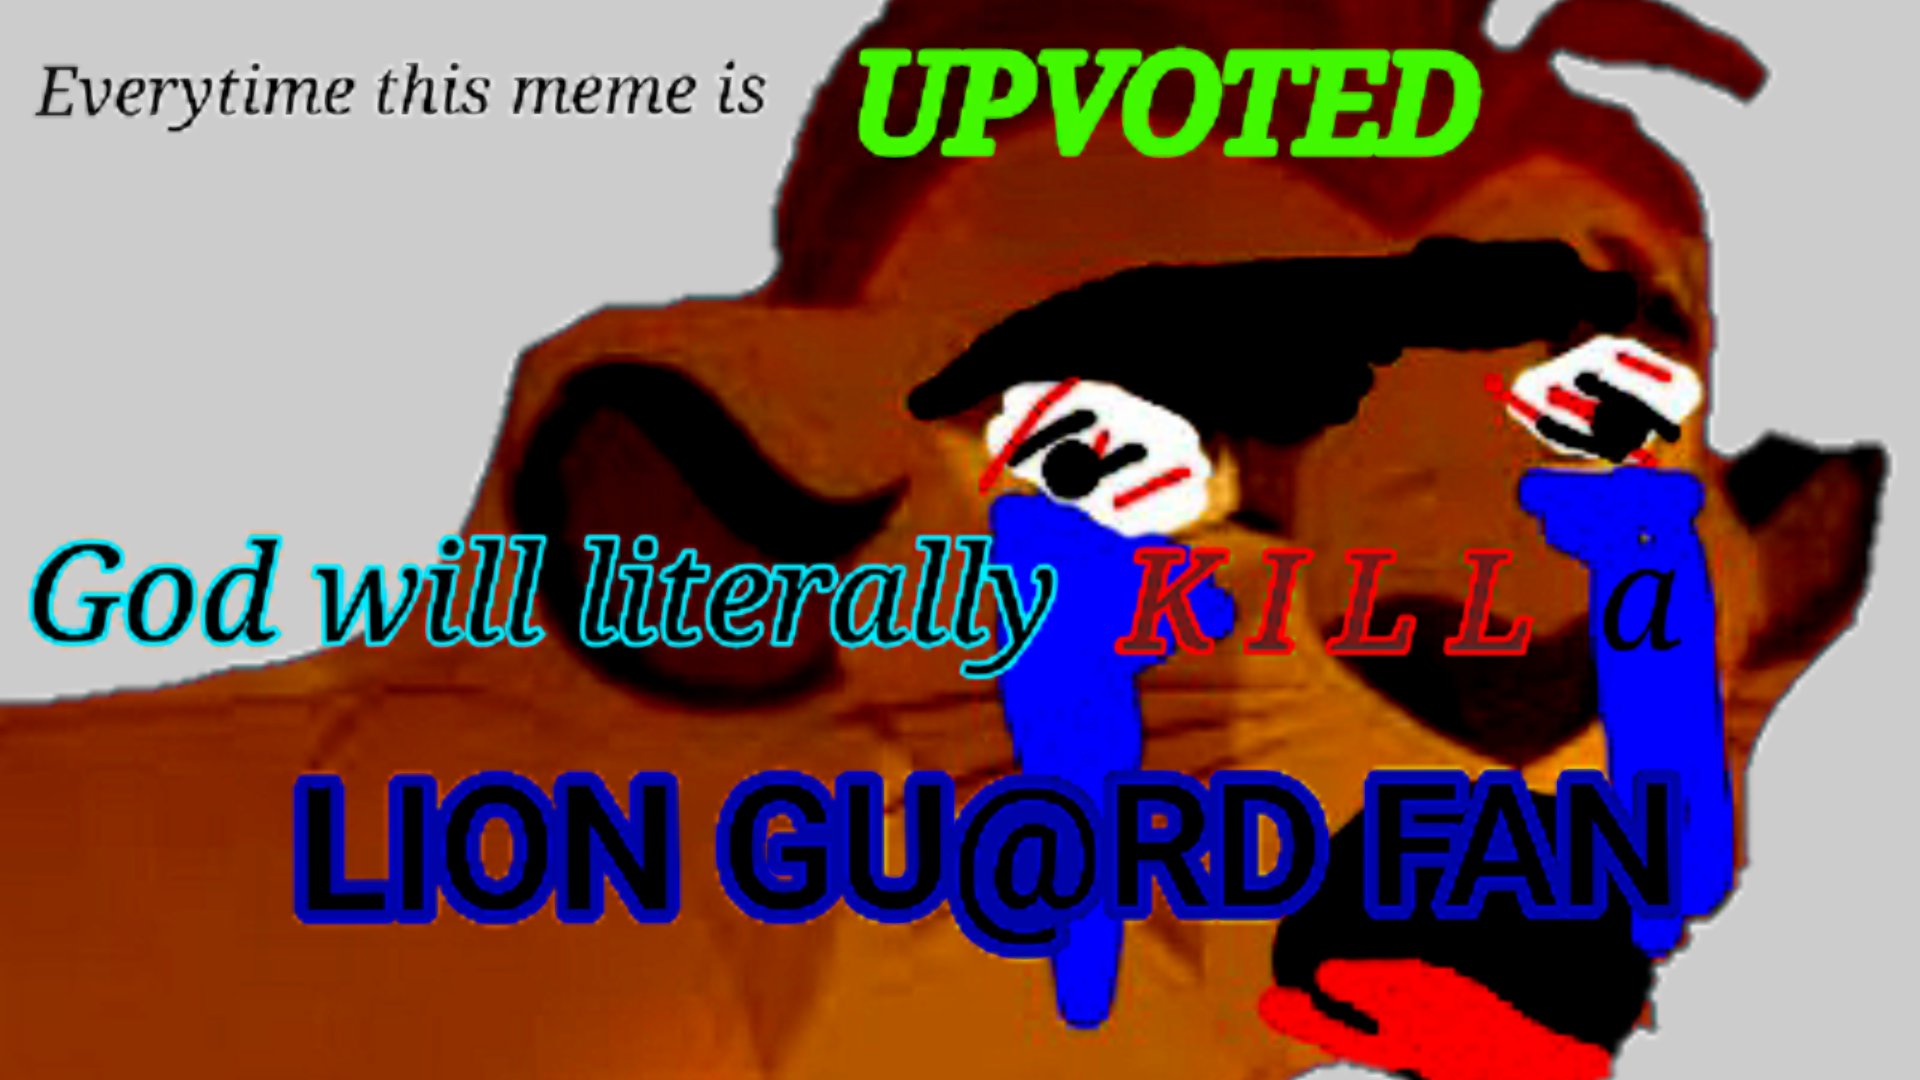 High Quality Everytime this meme is upvoted god will kill a lion gu@rd fan Blank Meme Template